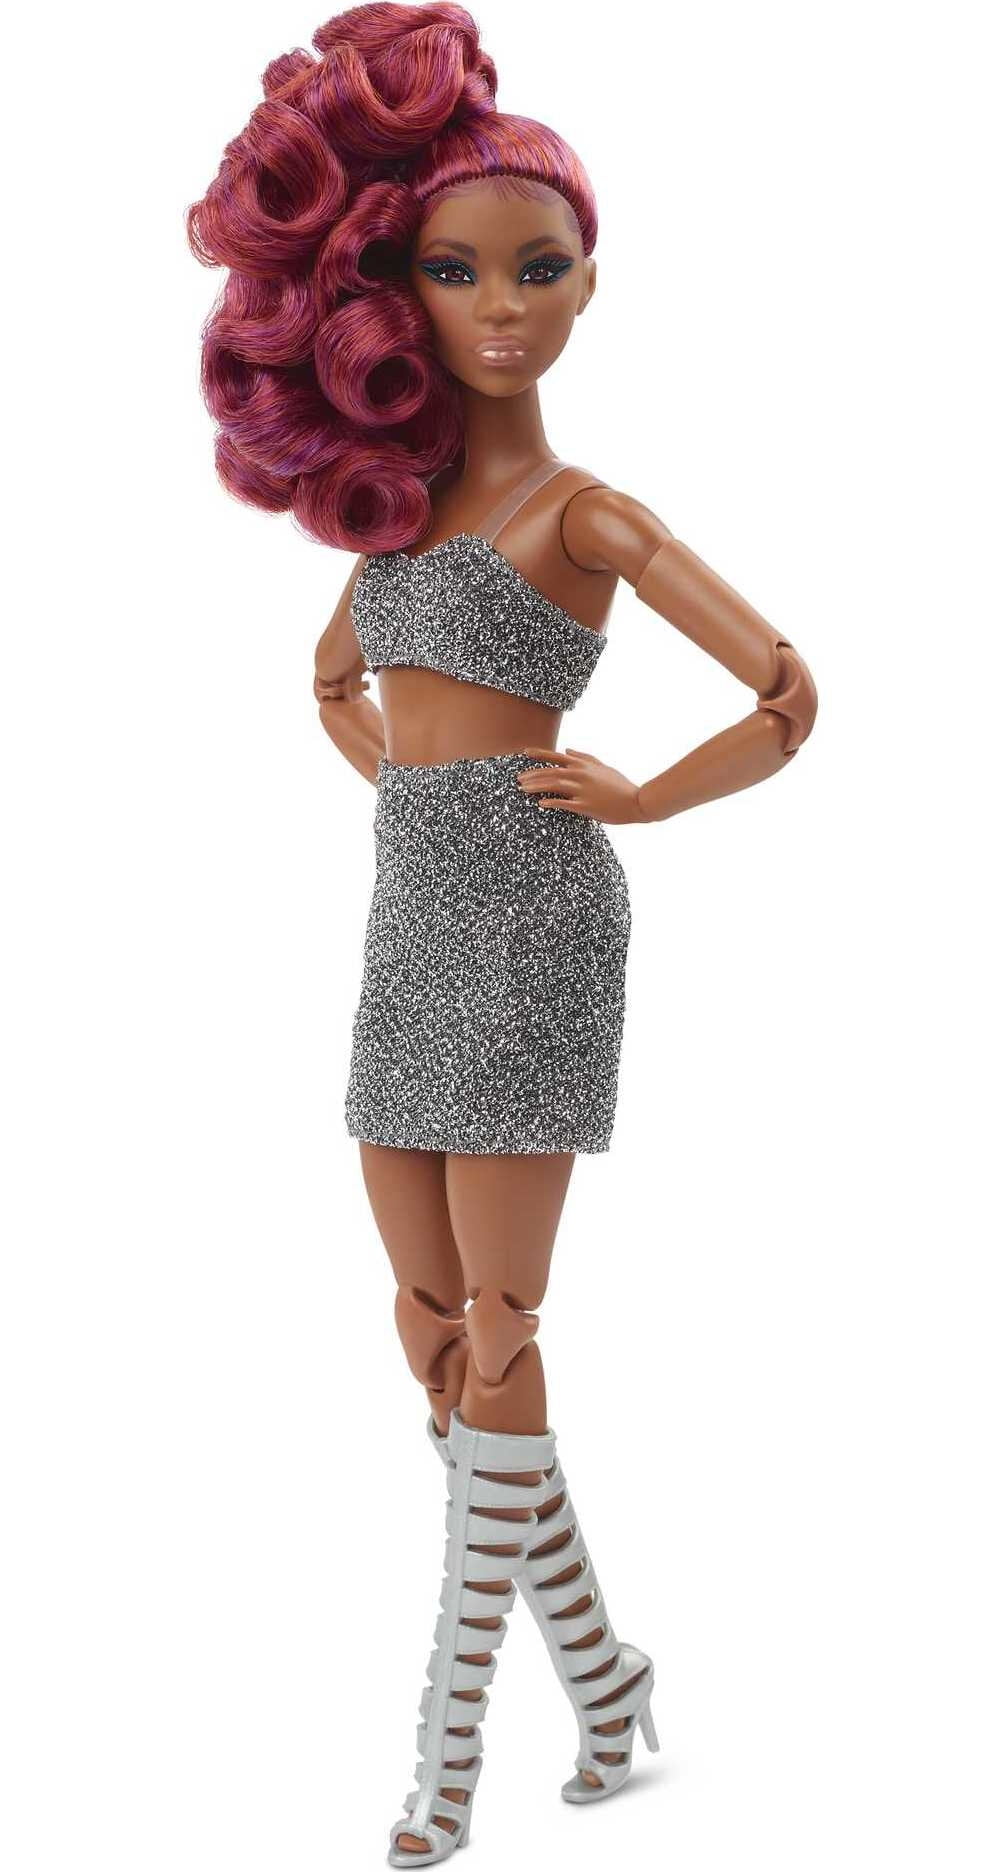 Barbie Signature Fully Posable Barbie Looks Doll (Petite, Curly Red Hair) -  